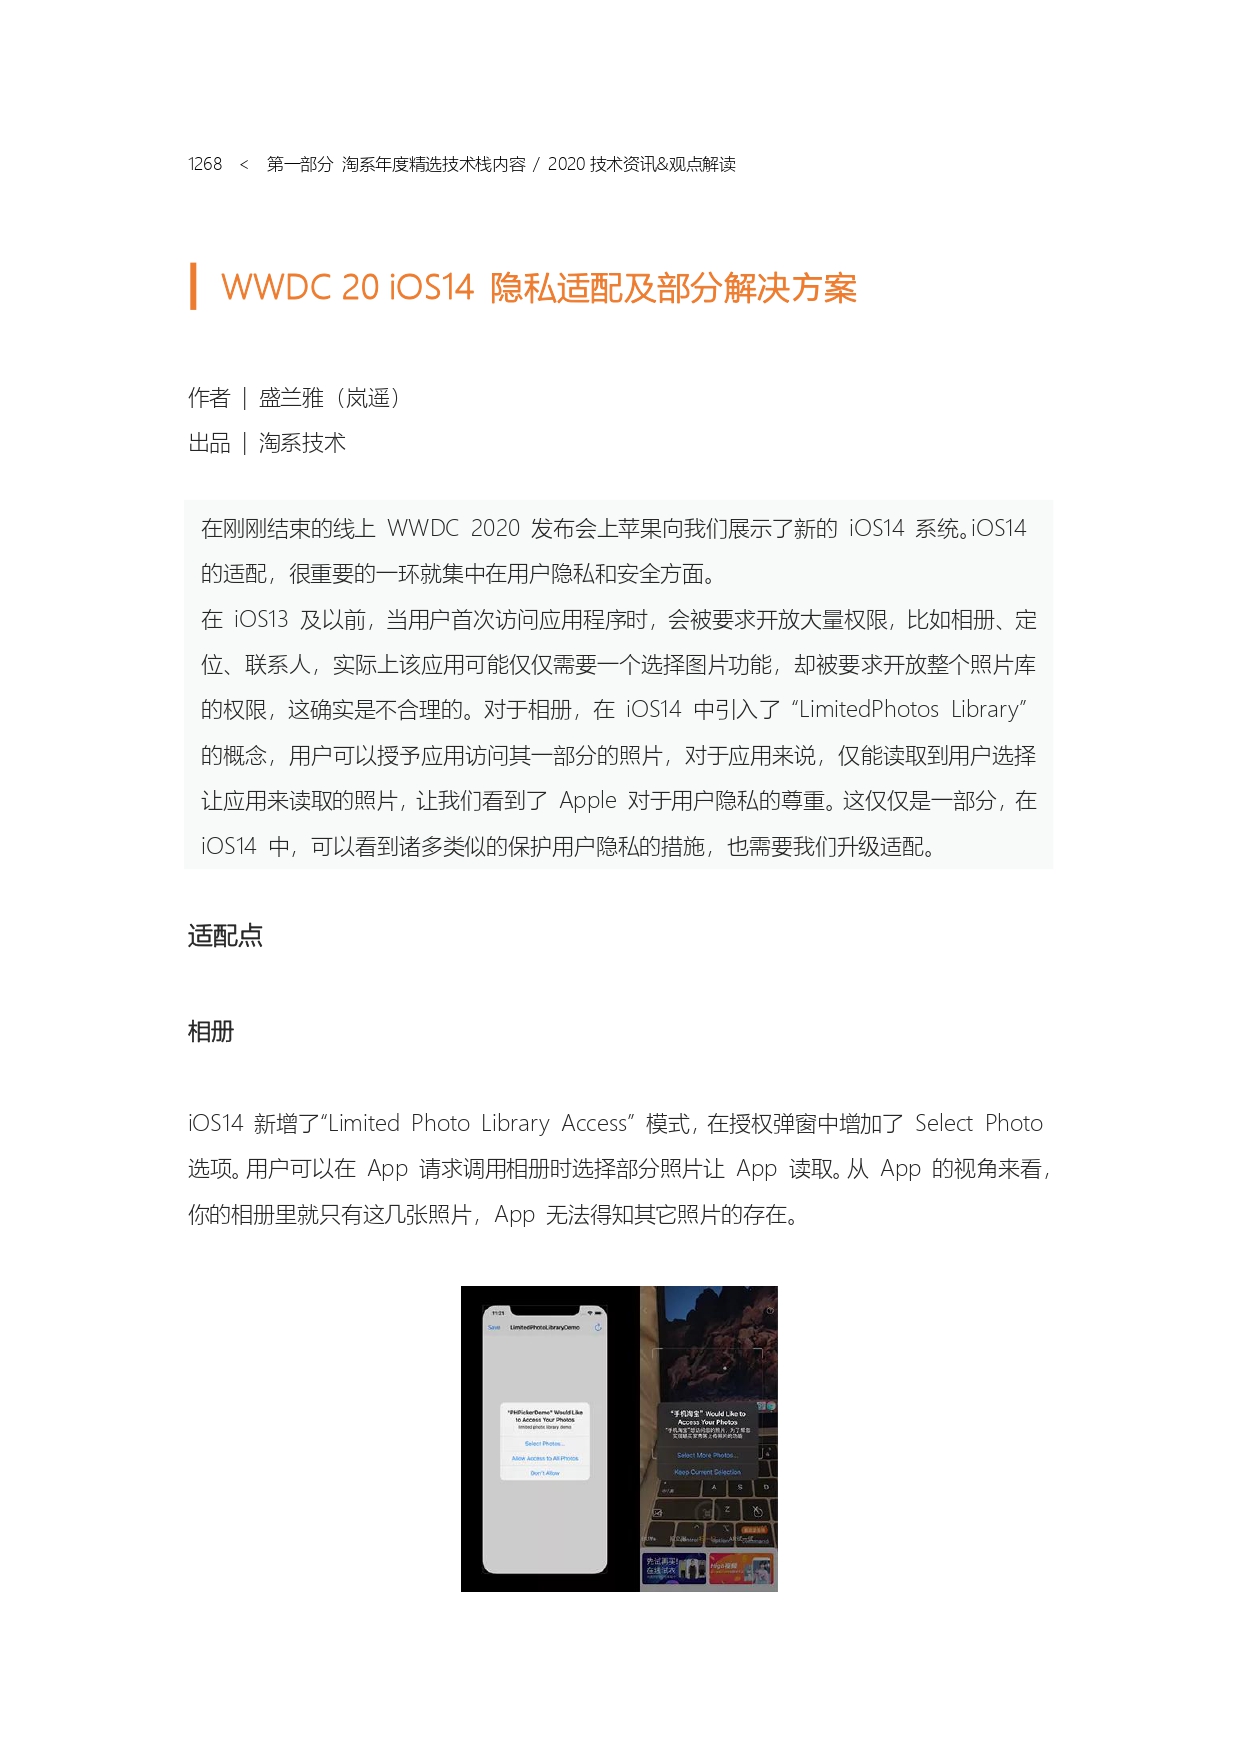 The Complete Works of Tao Technology 2020-1239-1312_page-0030.jpg